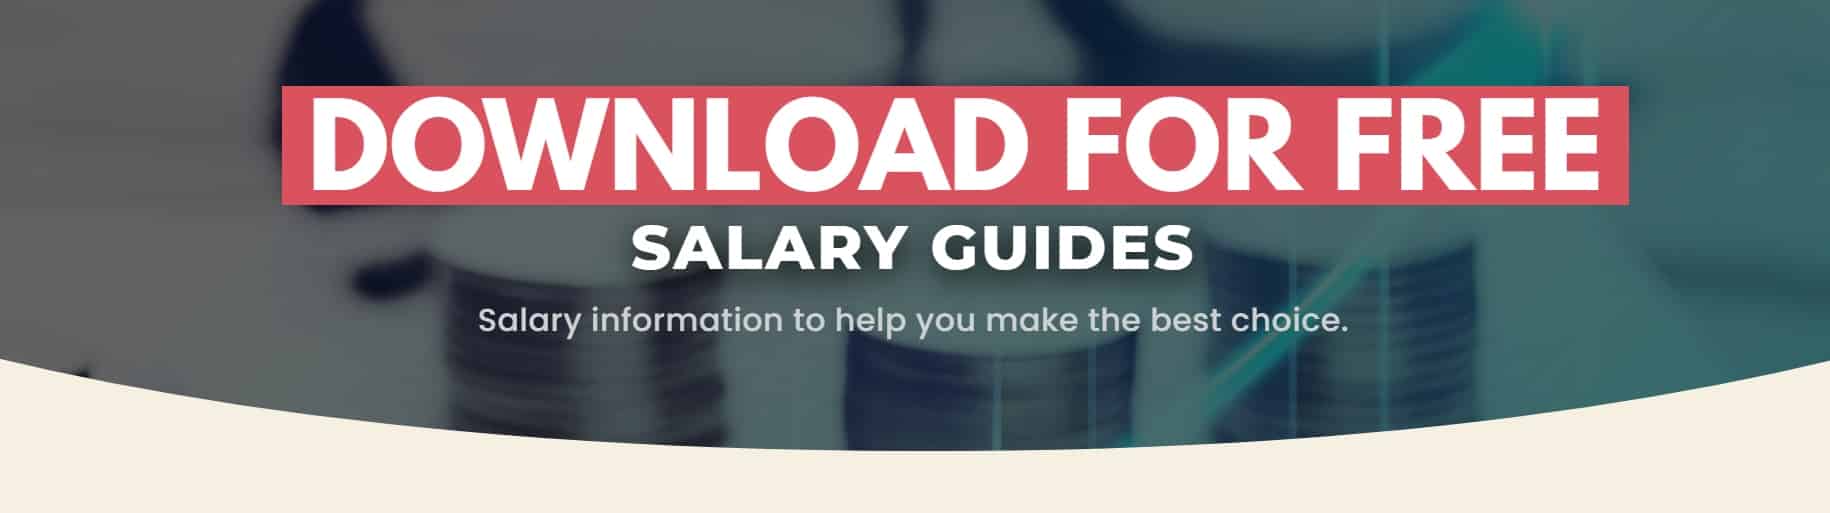 Opti Salary Guide Banner Salary Guides for 2022 1 1 1 1